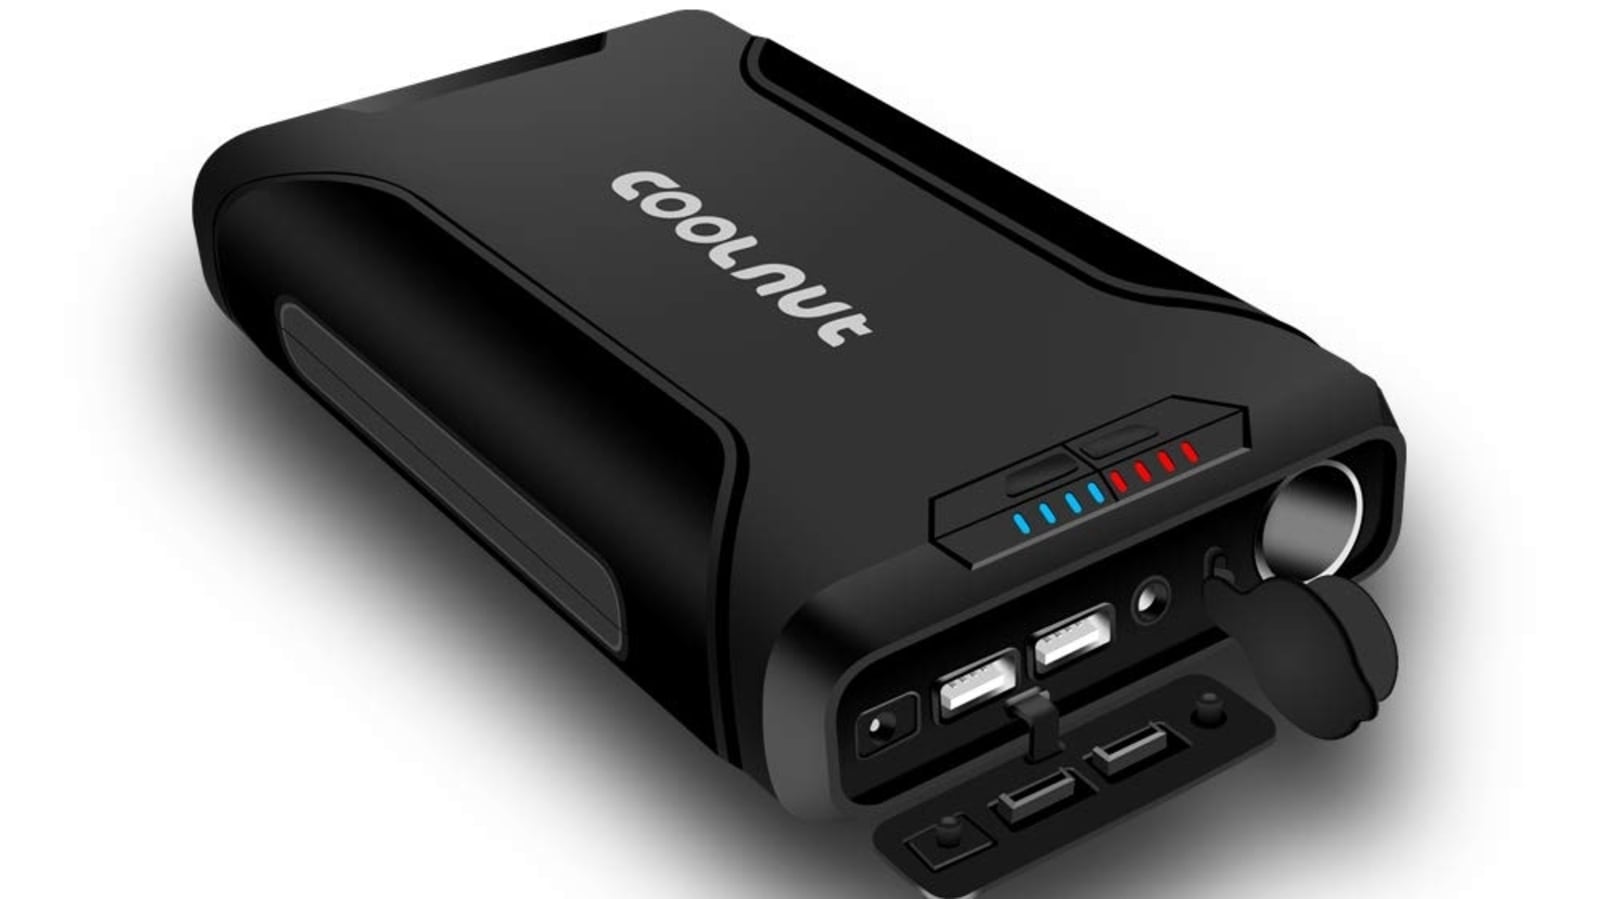 Fast charge your laptops with power banks anywhere and anytime